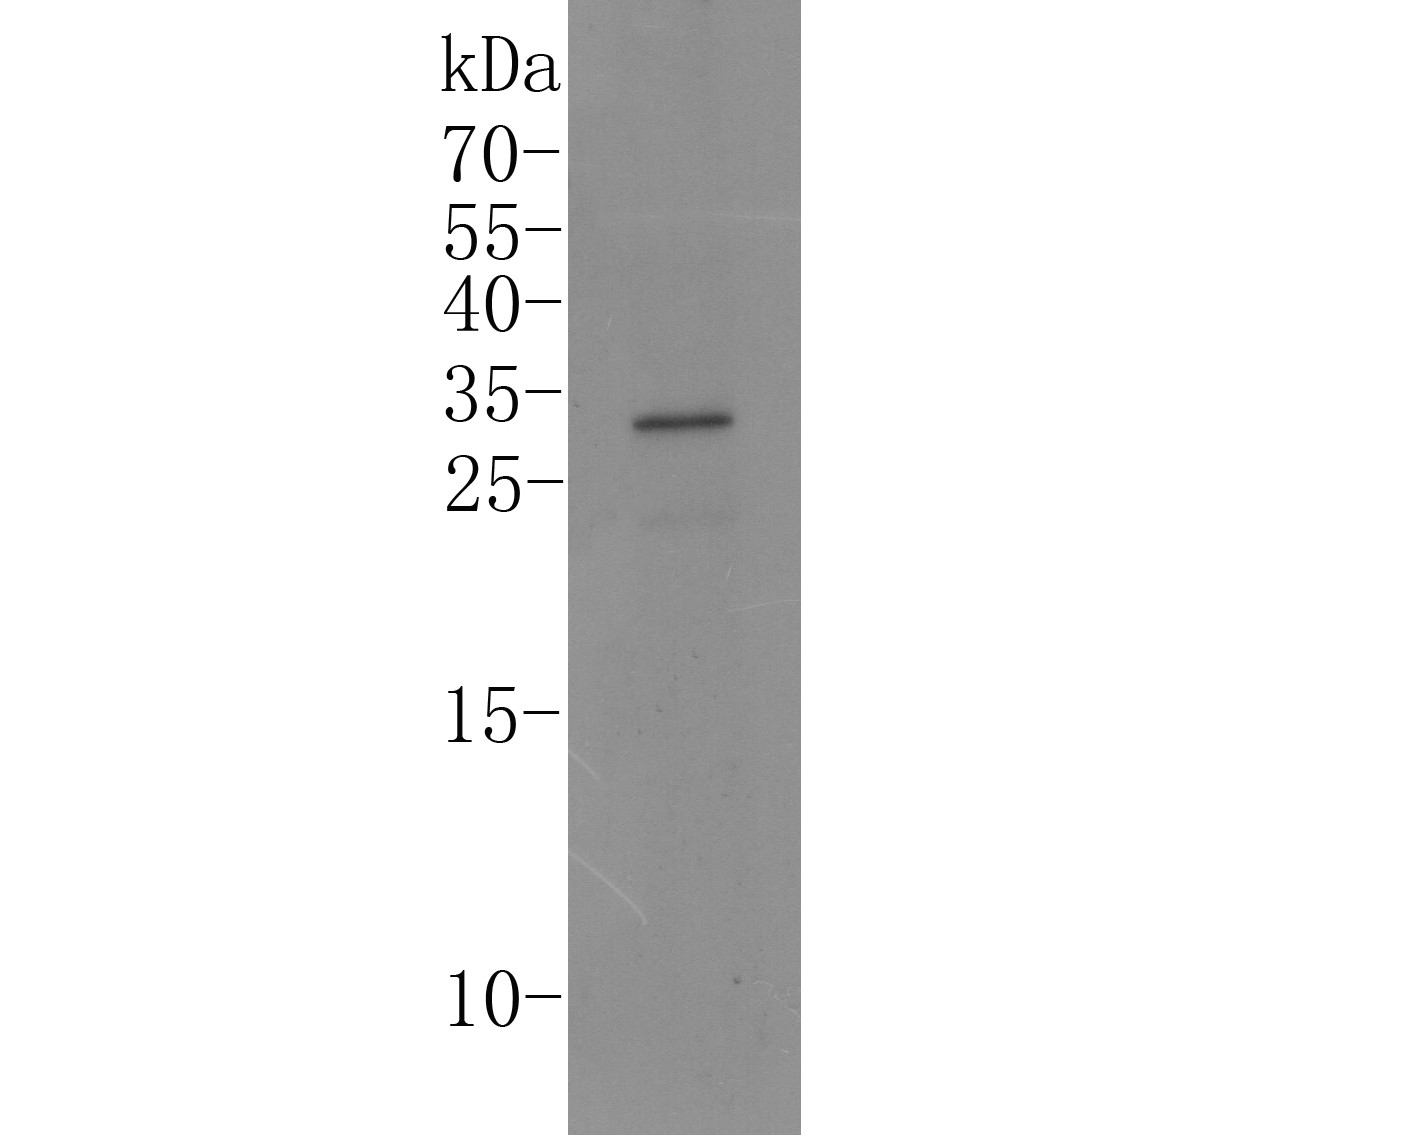 Western blot analysis of IL-17A on Human skeletal muscle tissue lysate. Proteins were transferred to a PVDF membrane and blocked with 5% BSA in PBS for 1 hour at room temperature. The primary antibody (ER1902-37, 1/500) was used in 5% BSA at room temperature for 2 hours. Goat Anti-Rabbit IgG - HRP Secondary Antibody (HA1001) at 1:5,000 dilution was used for 1 hour at room temperature.